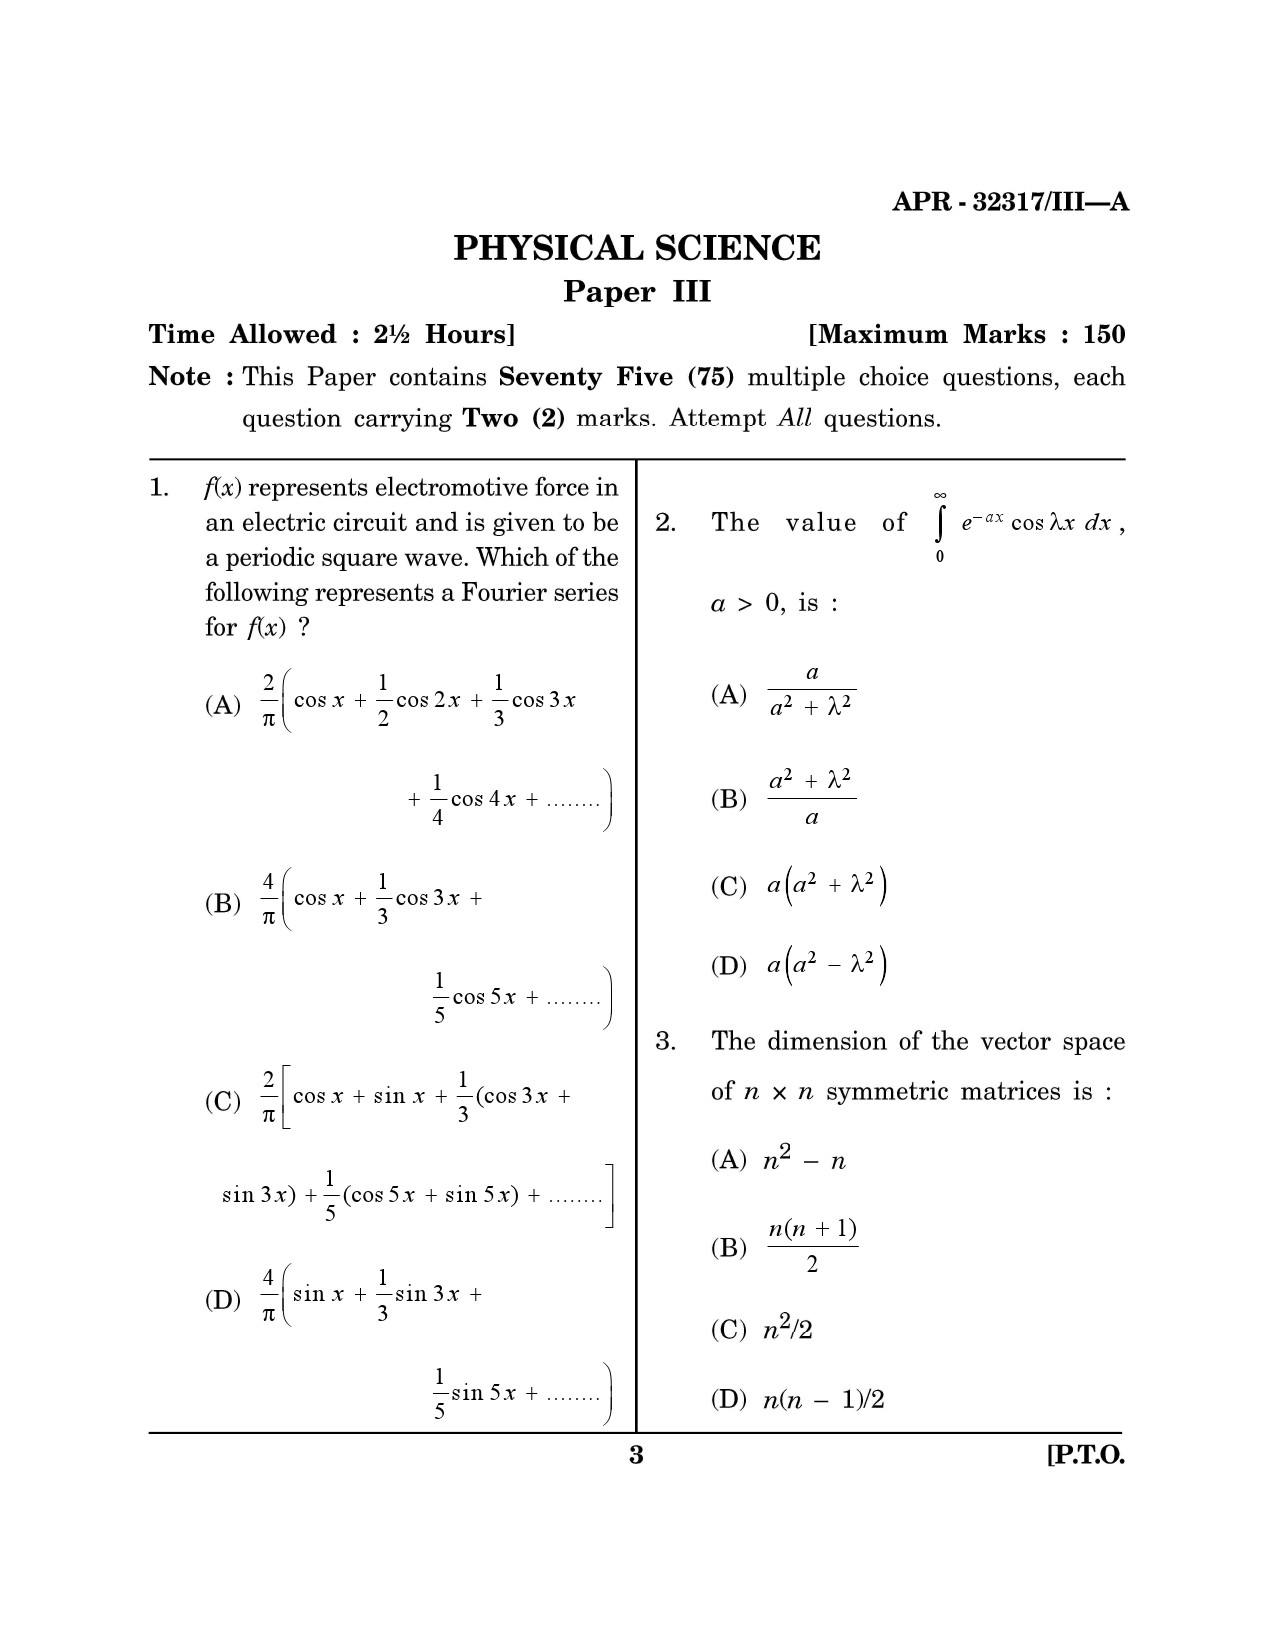 Maharashtra SET Physical Science Question Paper III April 2017 2